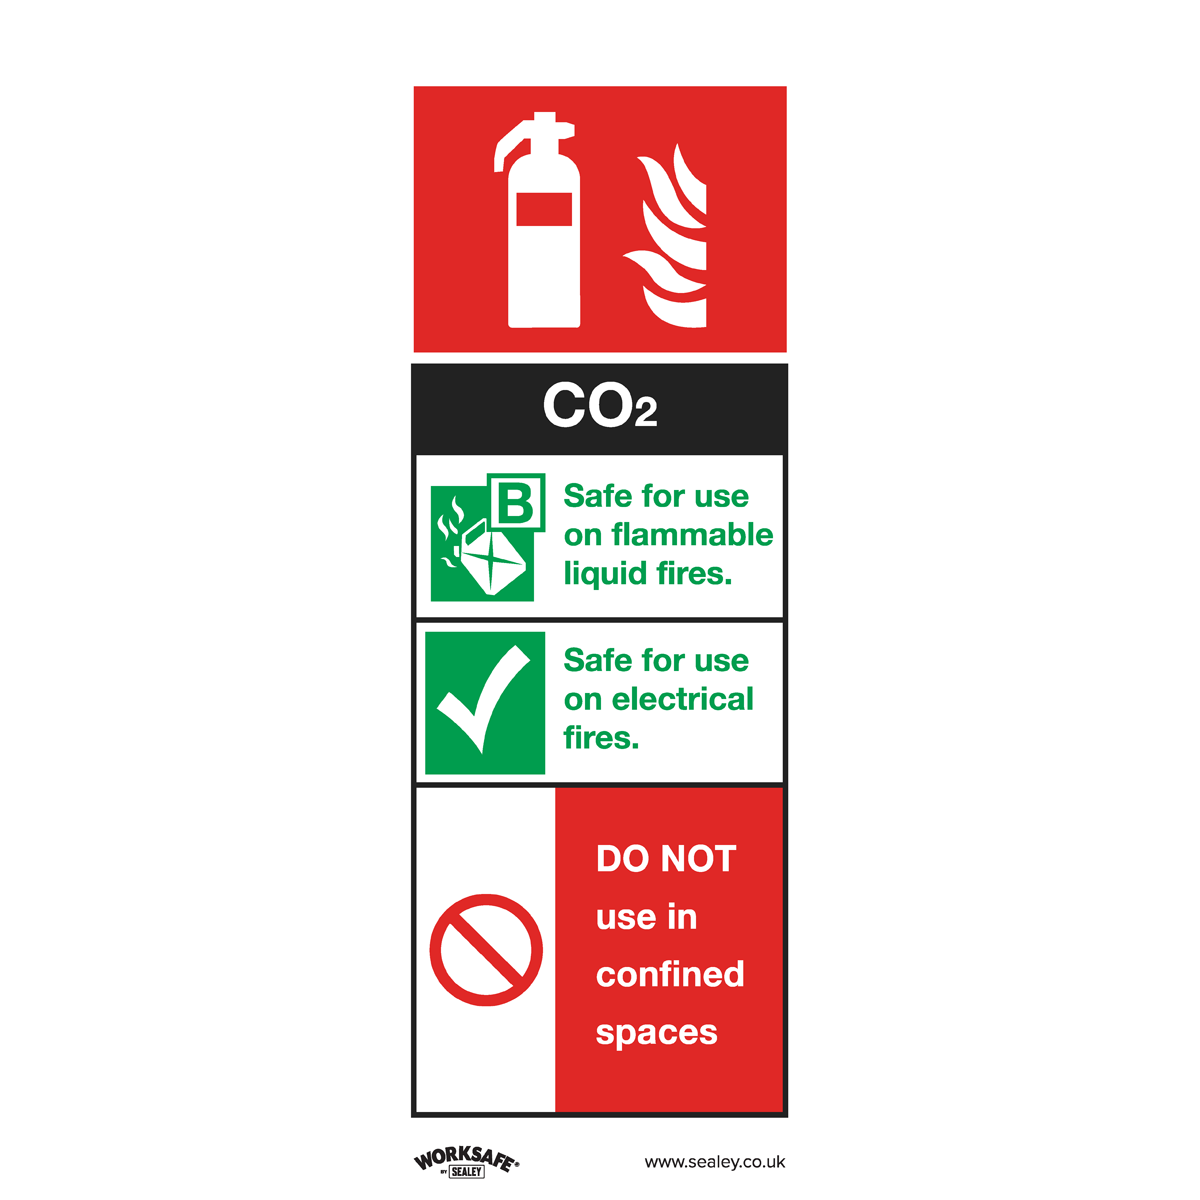 Sealey Safe Conditions Safety Sign - CO2 Fire Extinguisher - Rigid Plastic